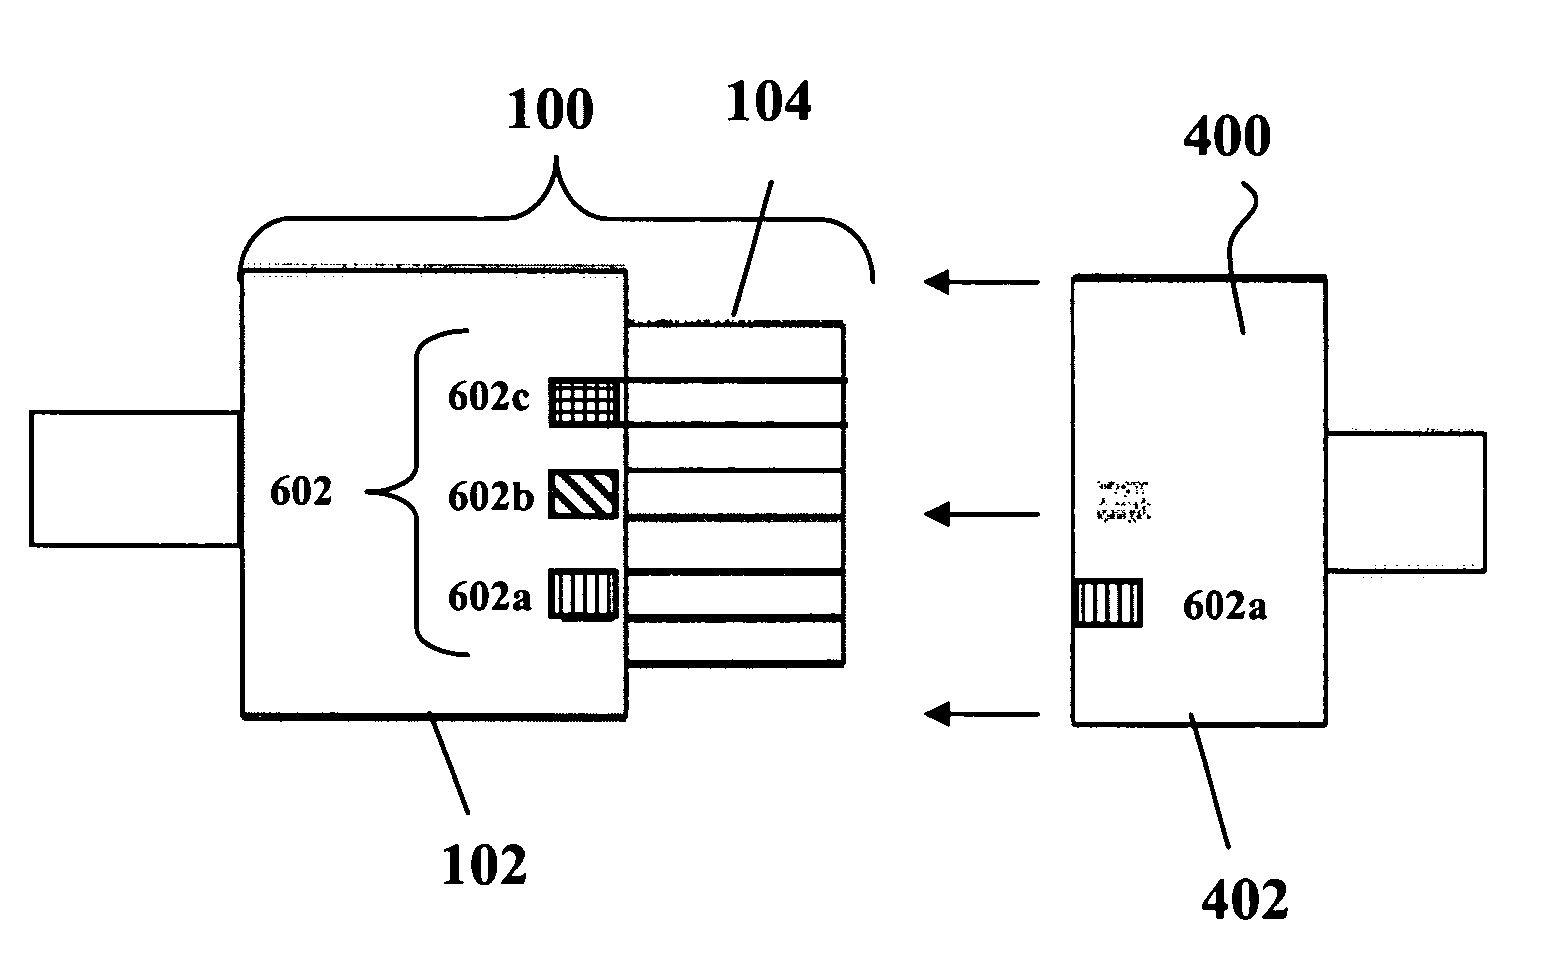 Key coded power adapter connectors